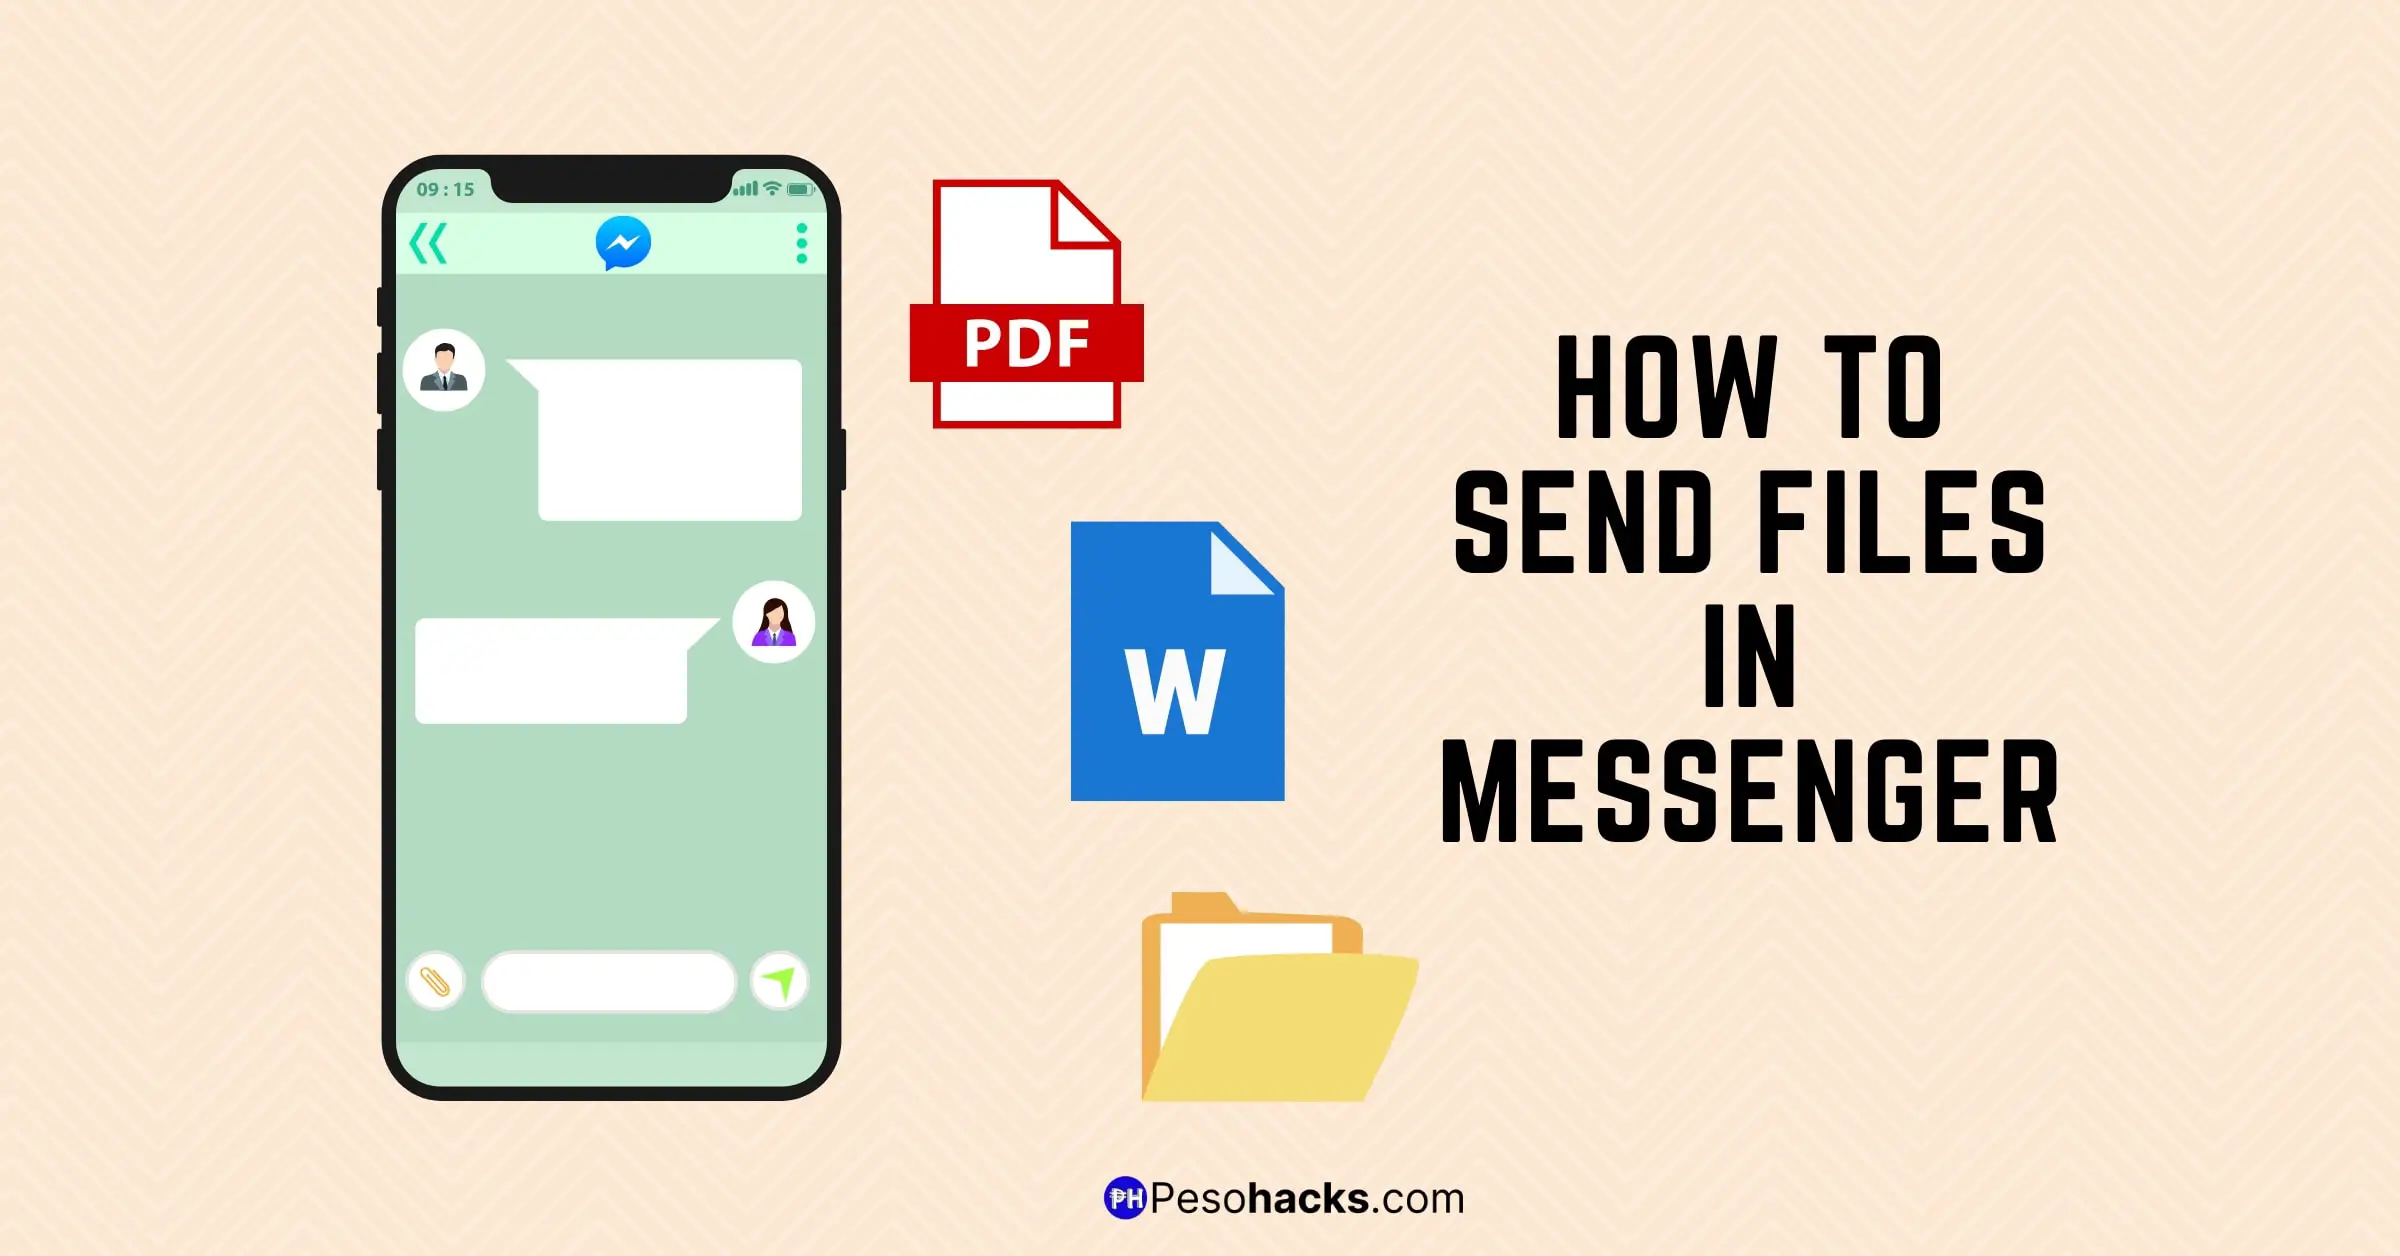 How to send files in messenger